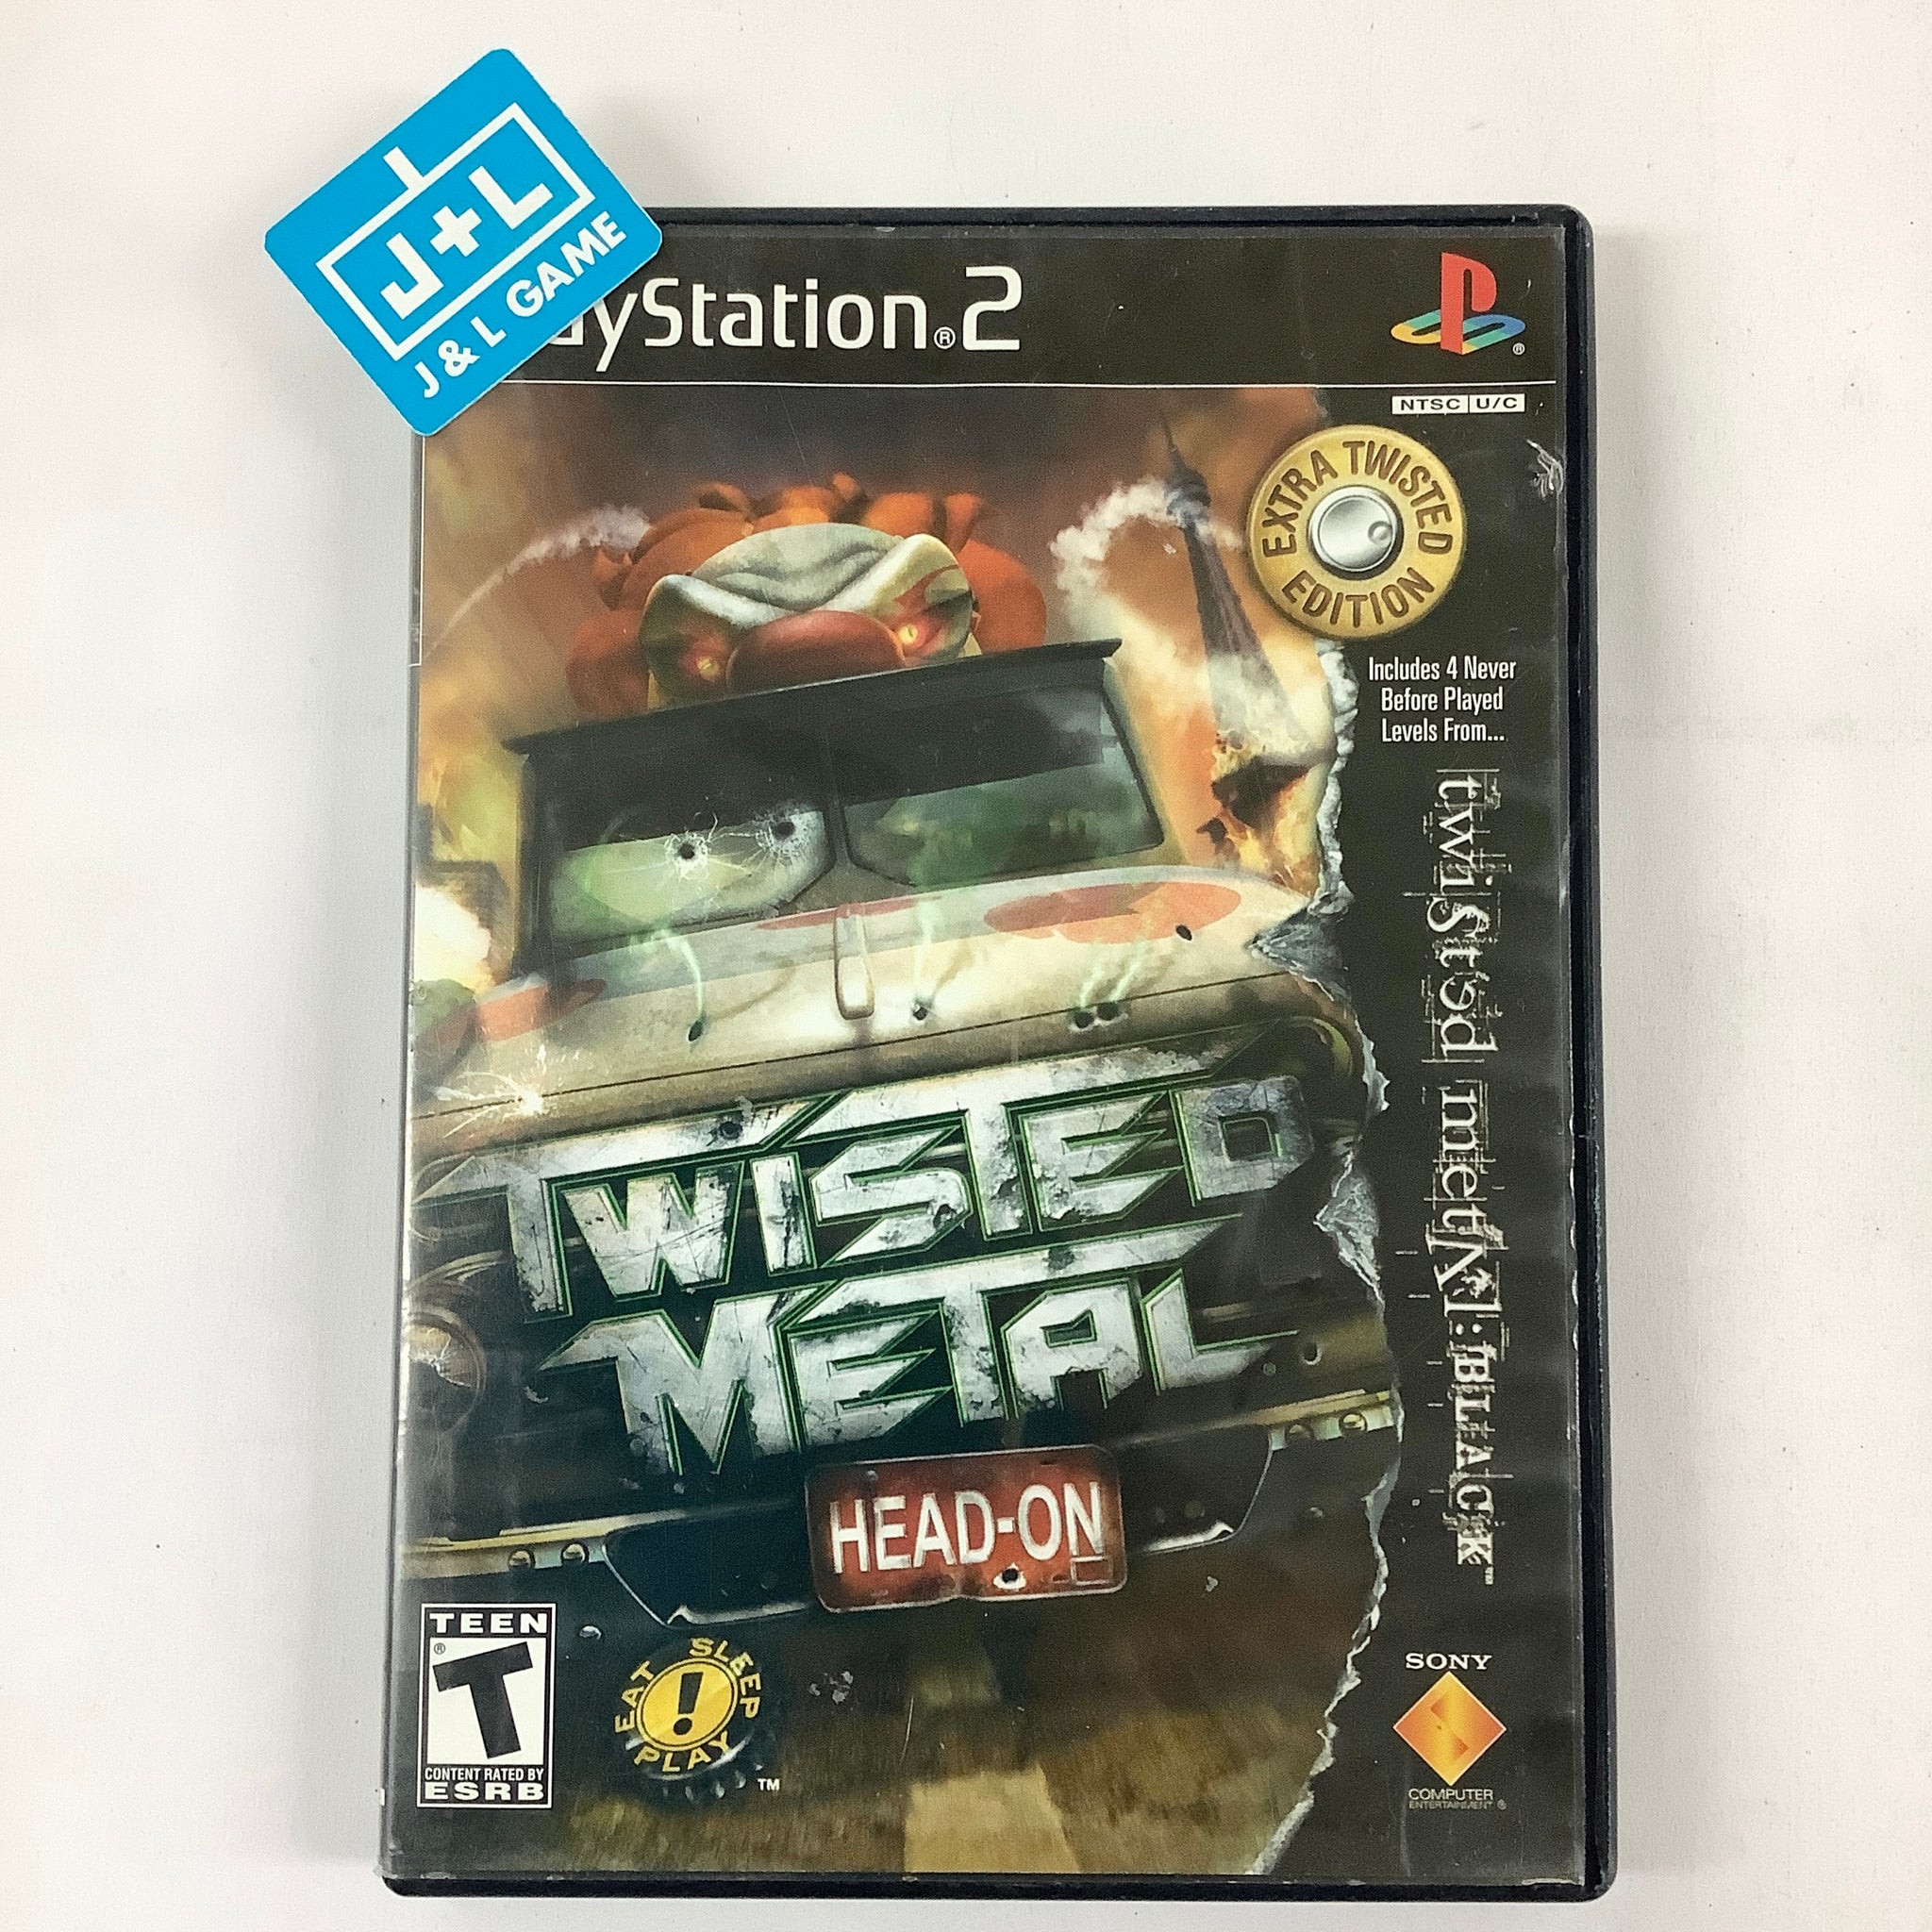 Twisted Metal: Head-On All Characters [PSP] 